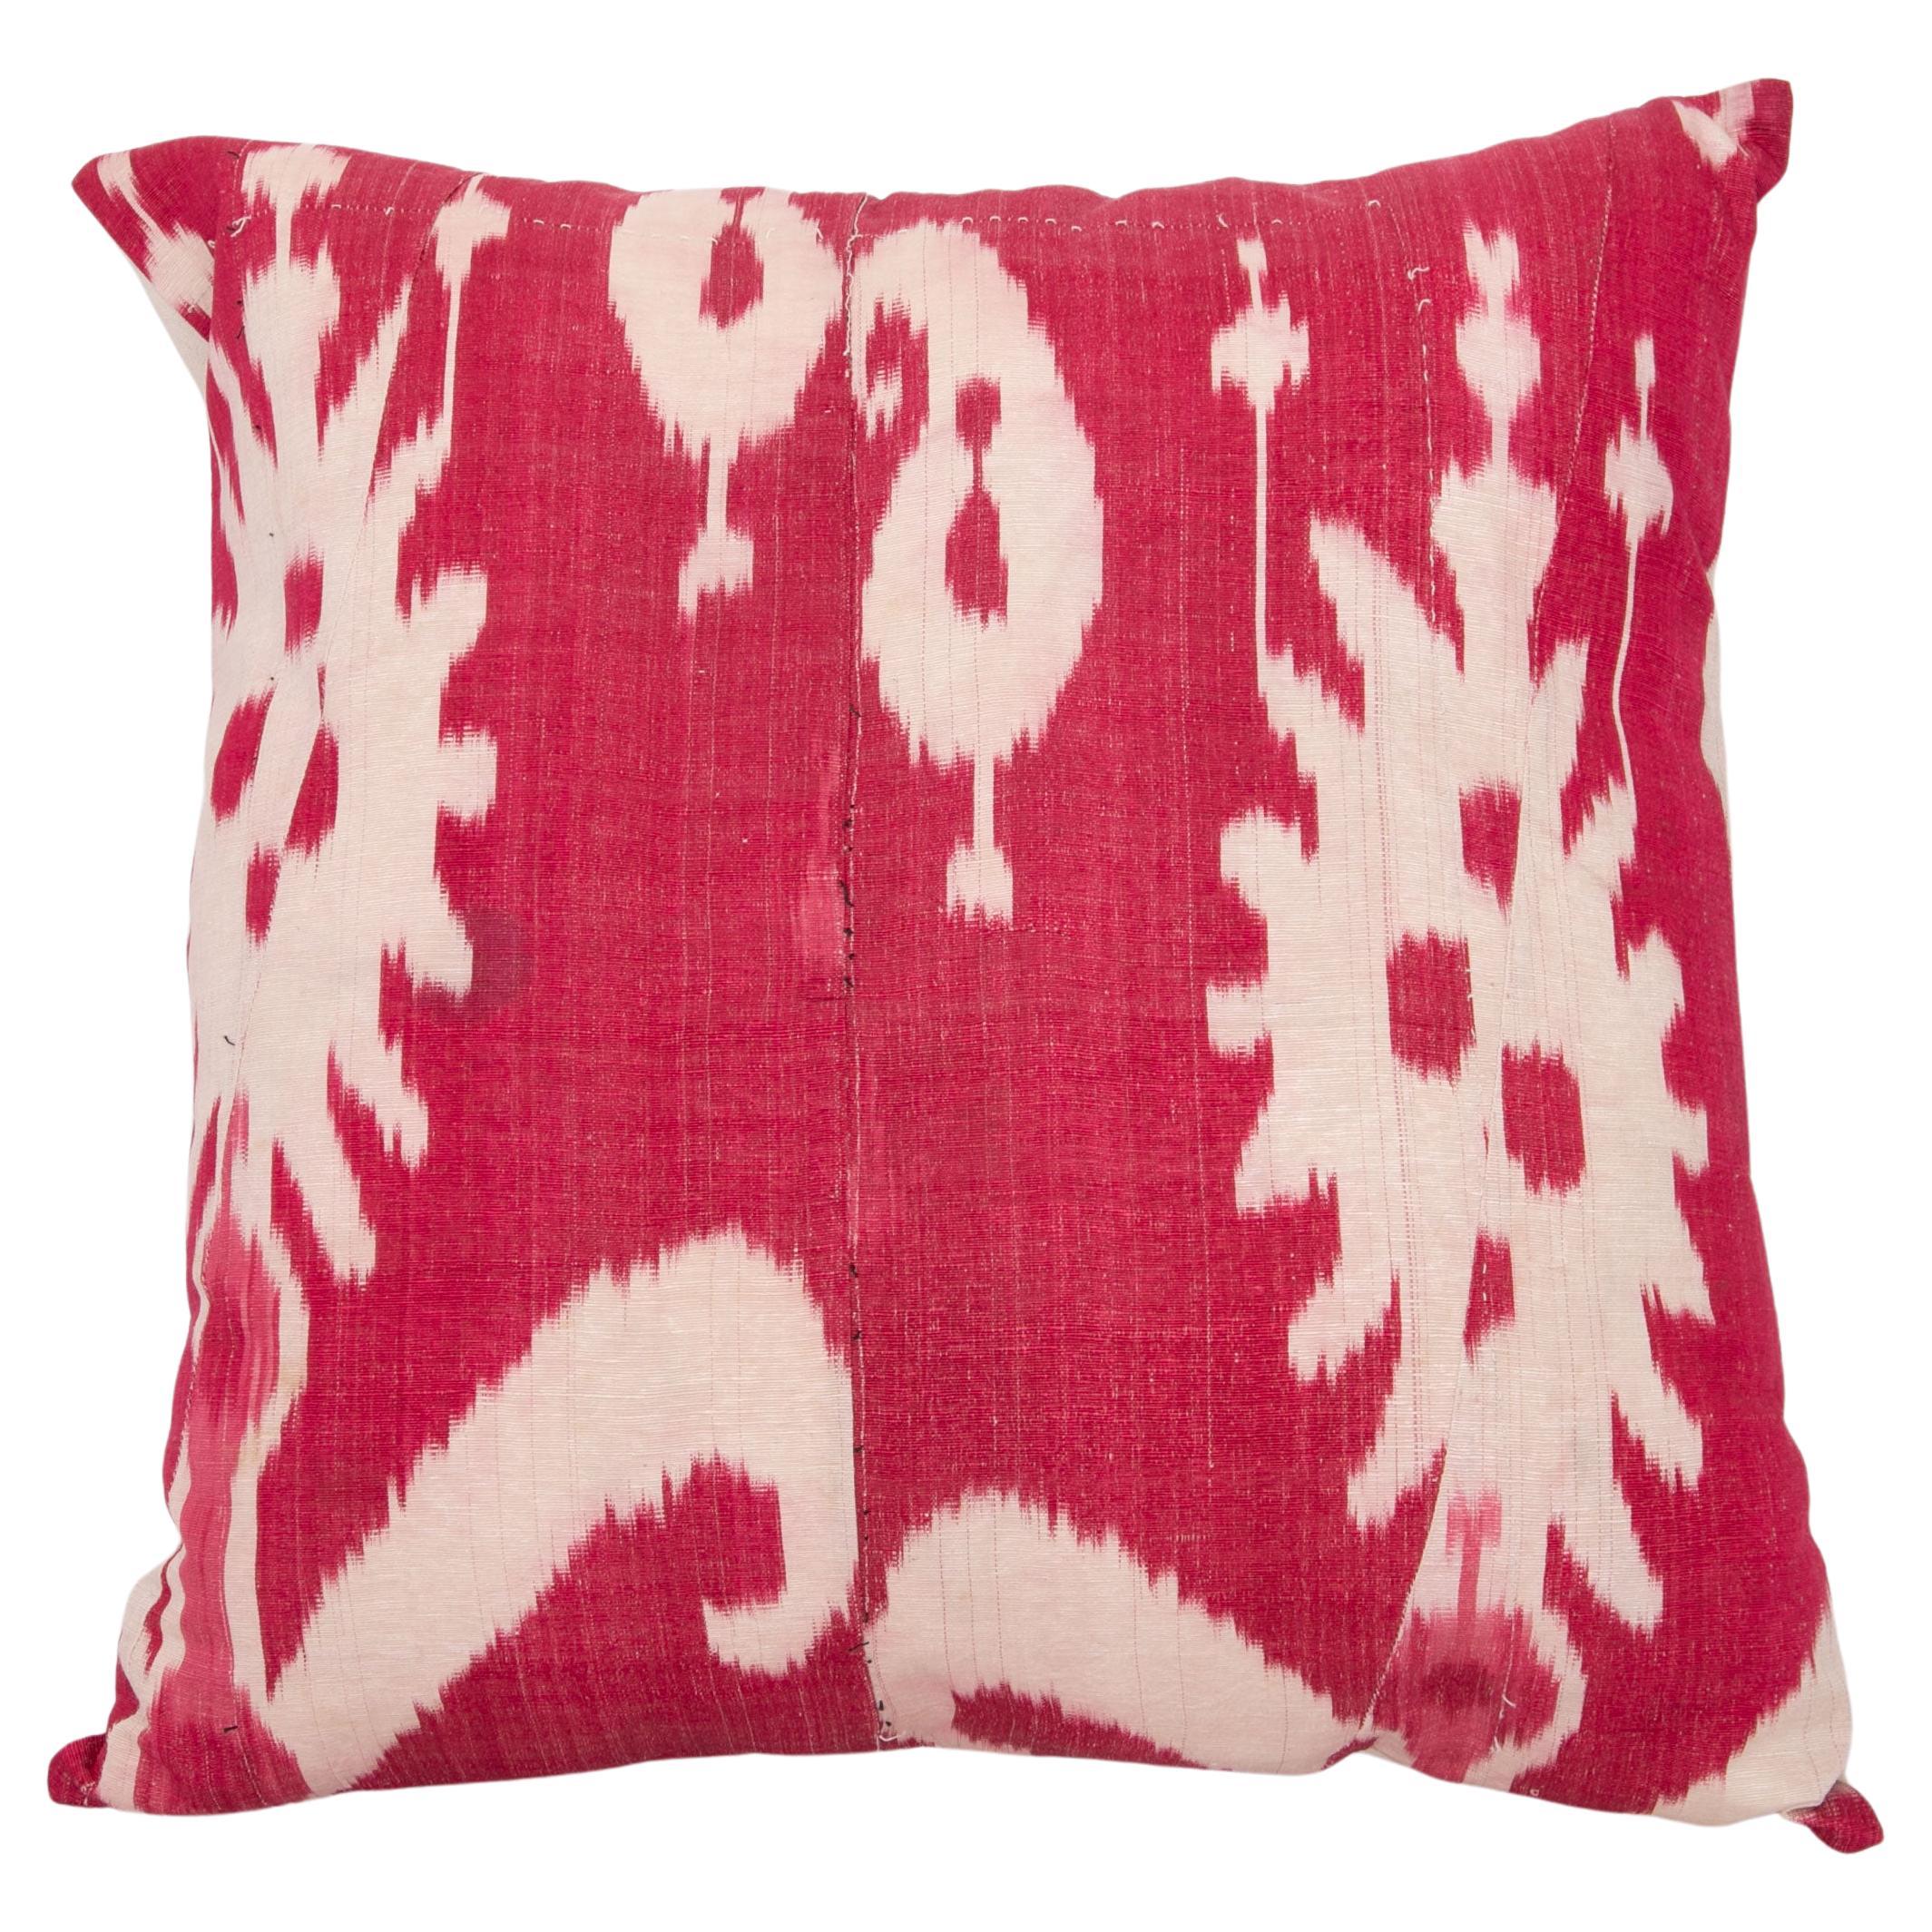 Ikat Pillow Cover Made from an Antique Silk and Cotton Ikat